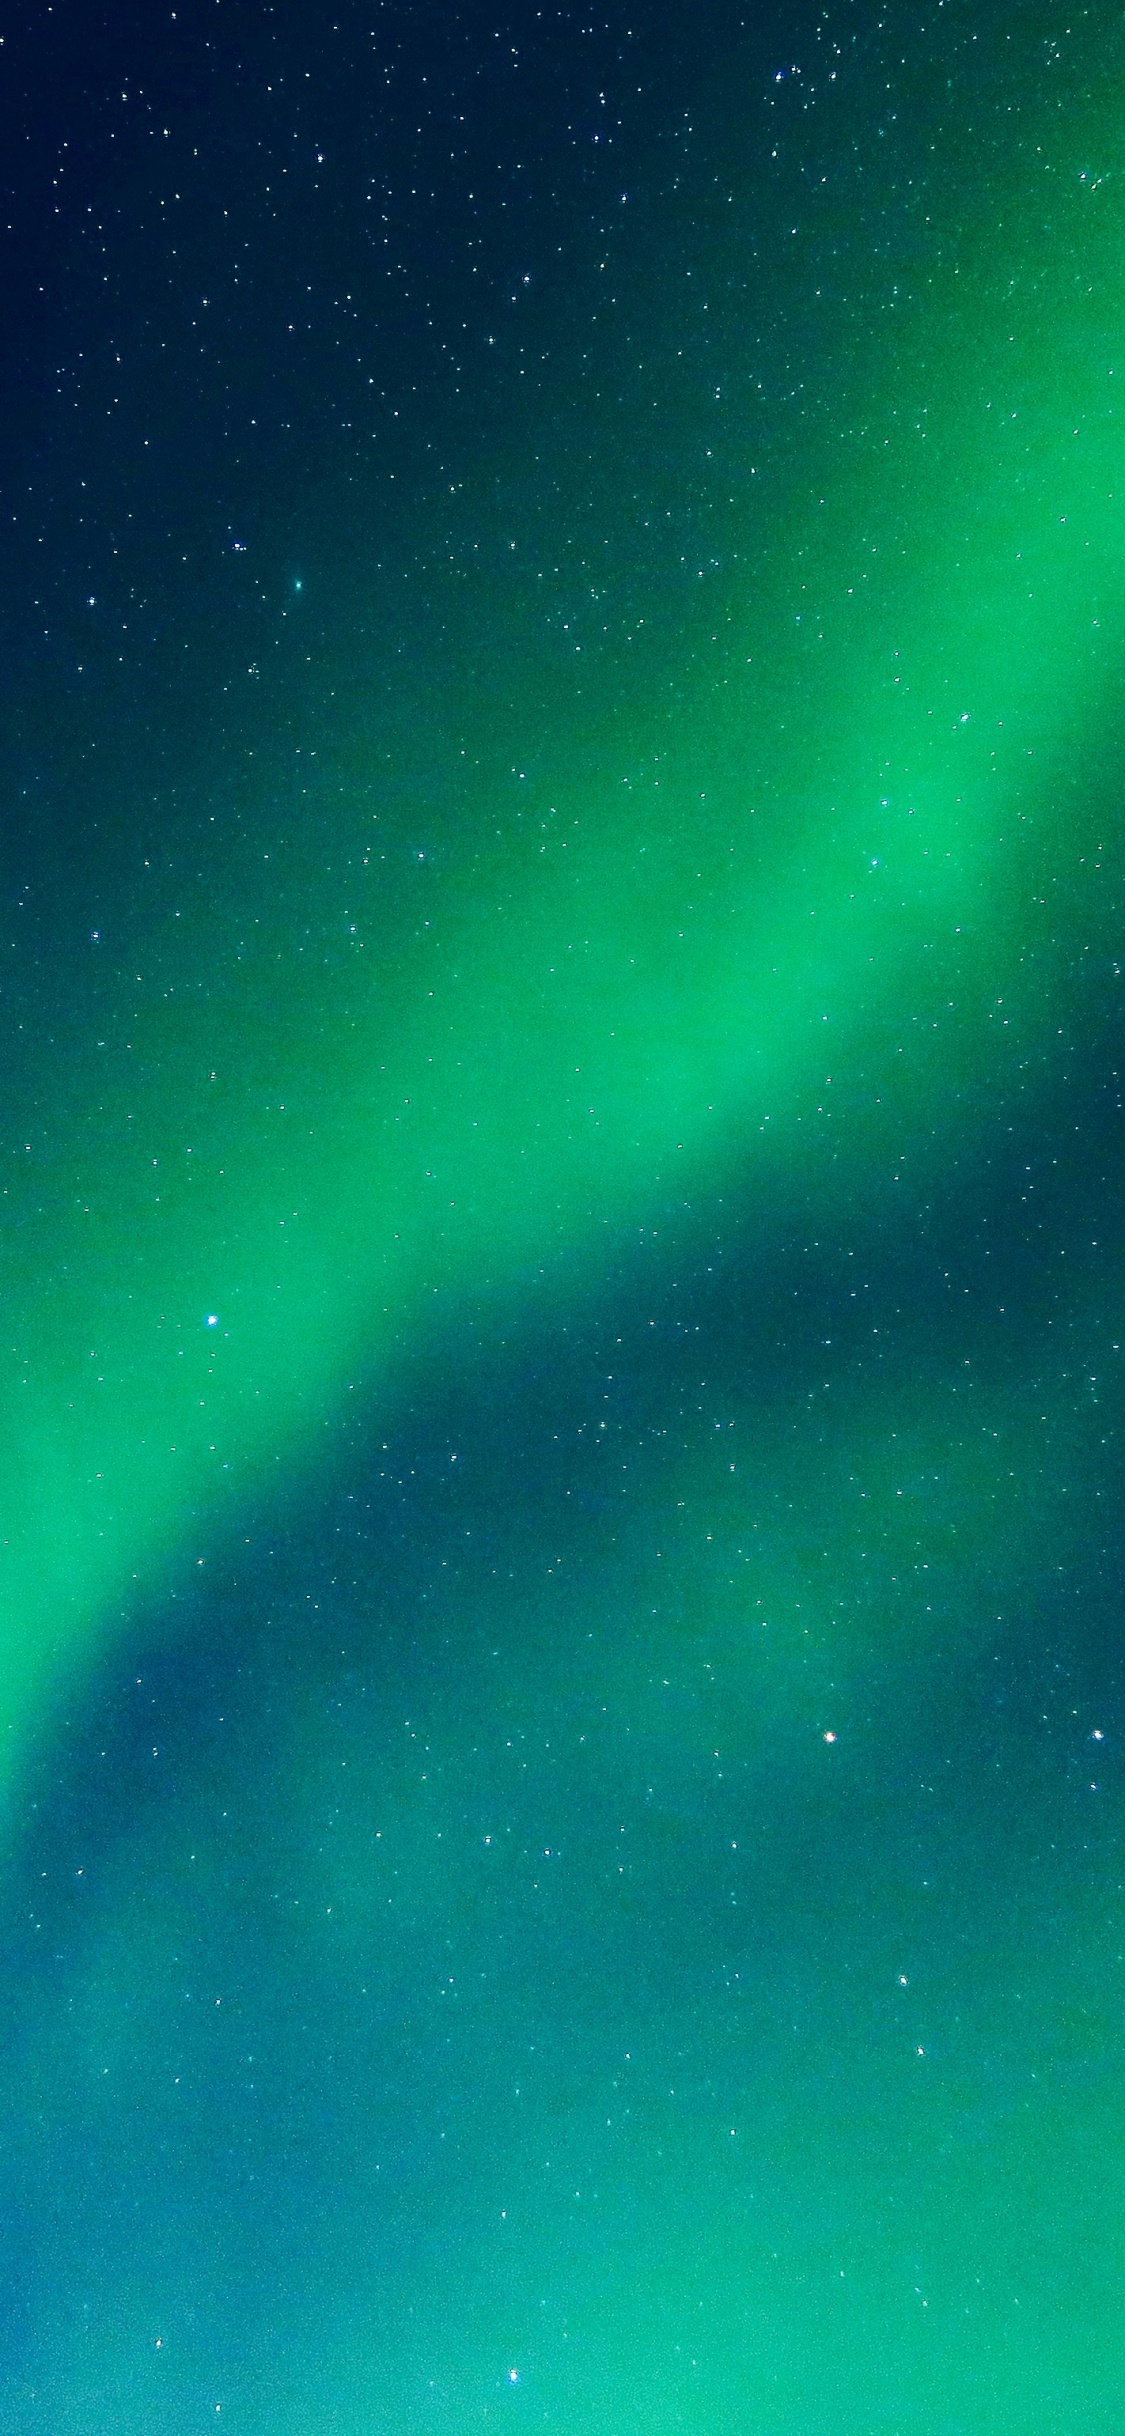 Green and Blue Sky During Night Time. Wallpaper in 1125x2436 Resolution